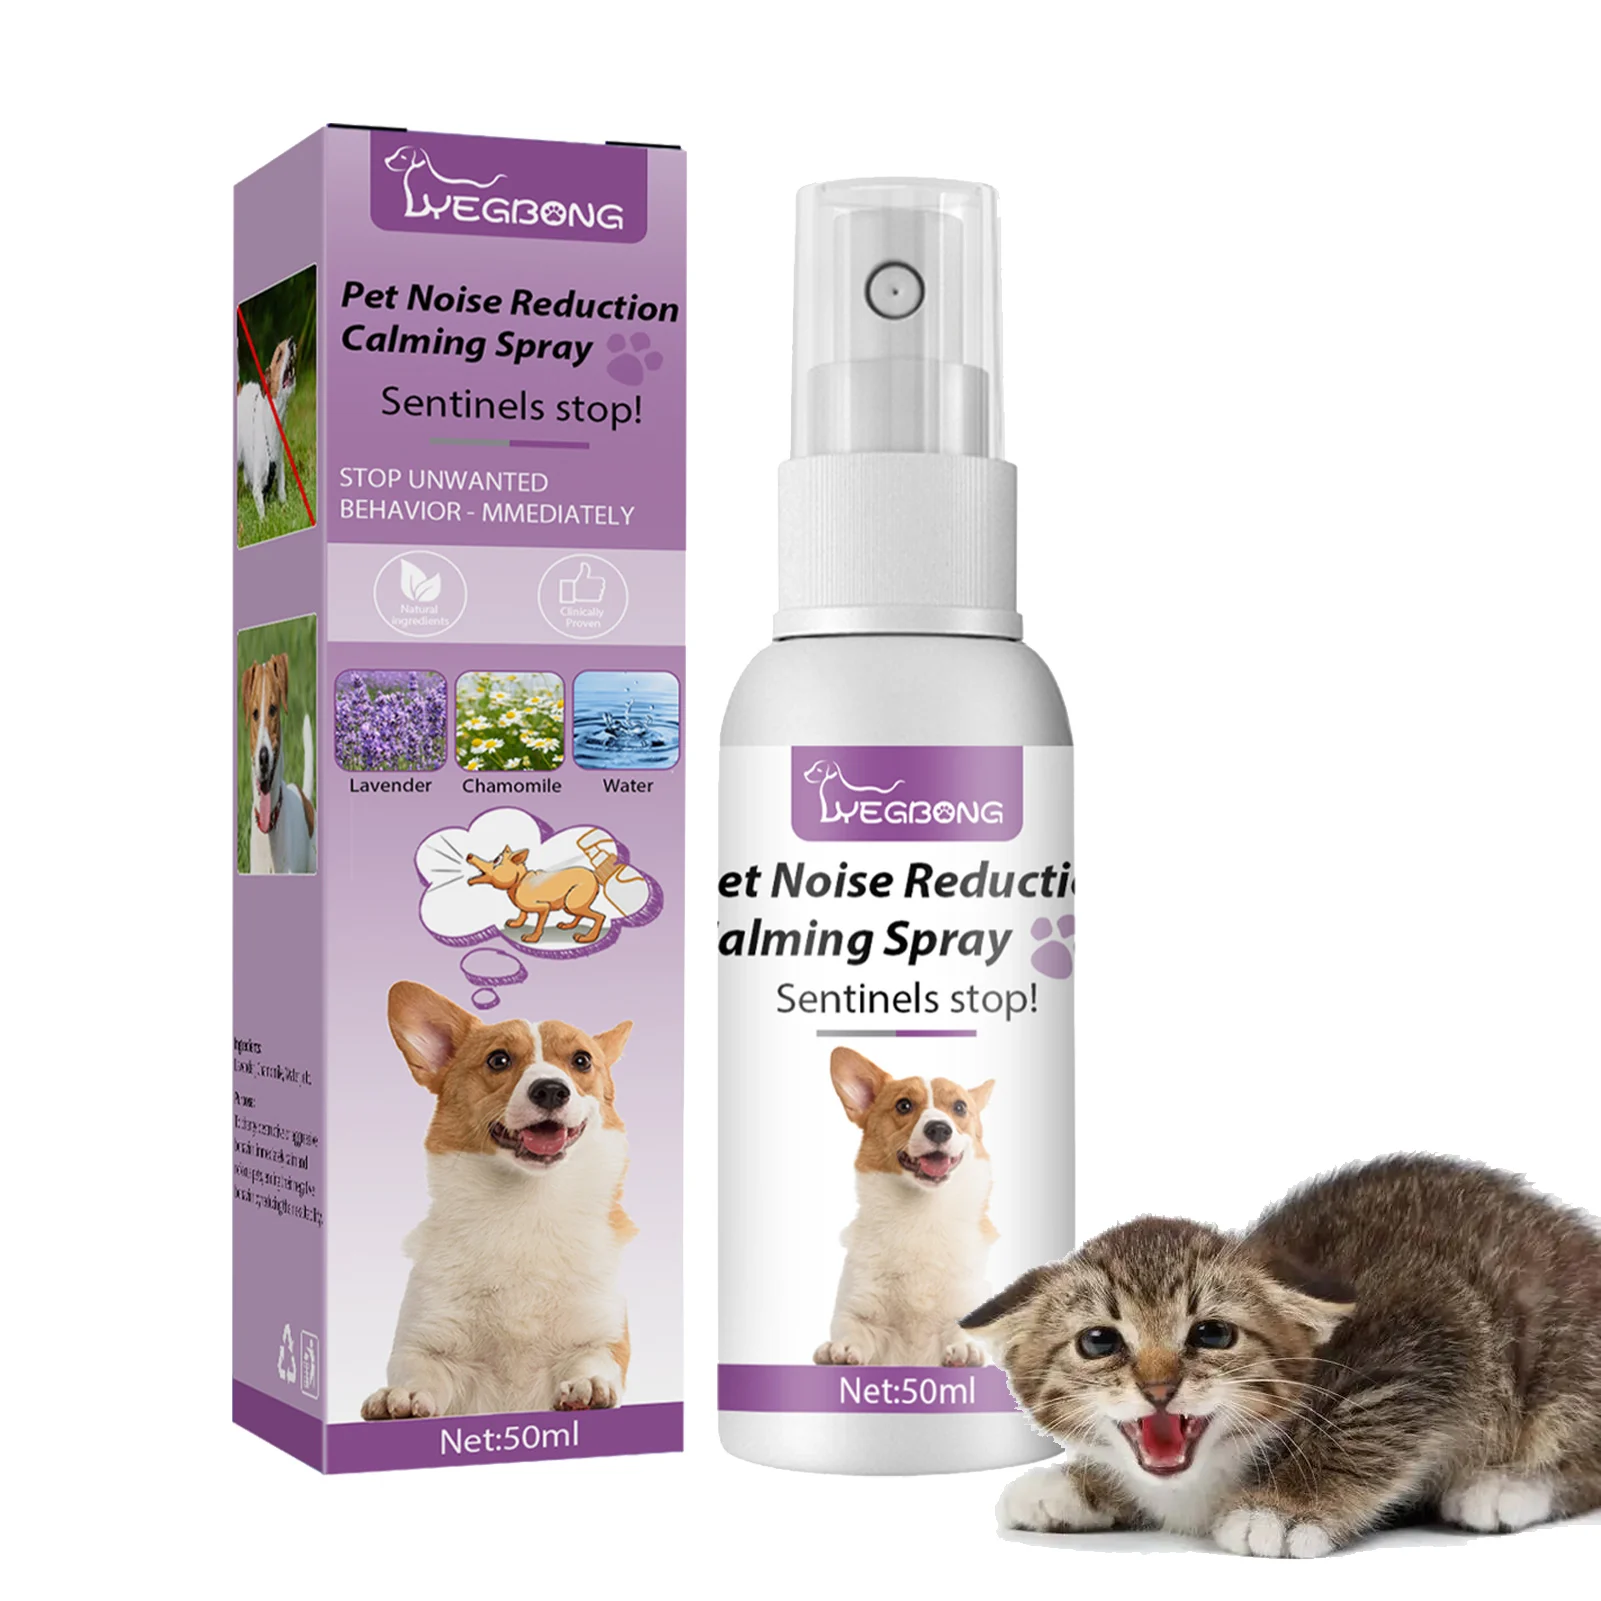 

Calming Spray For Dogs Natural Dog Spray For All Dogs To Calm And Soothe Comfort Cats Dogs During Travel Veterinary Visits And